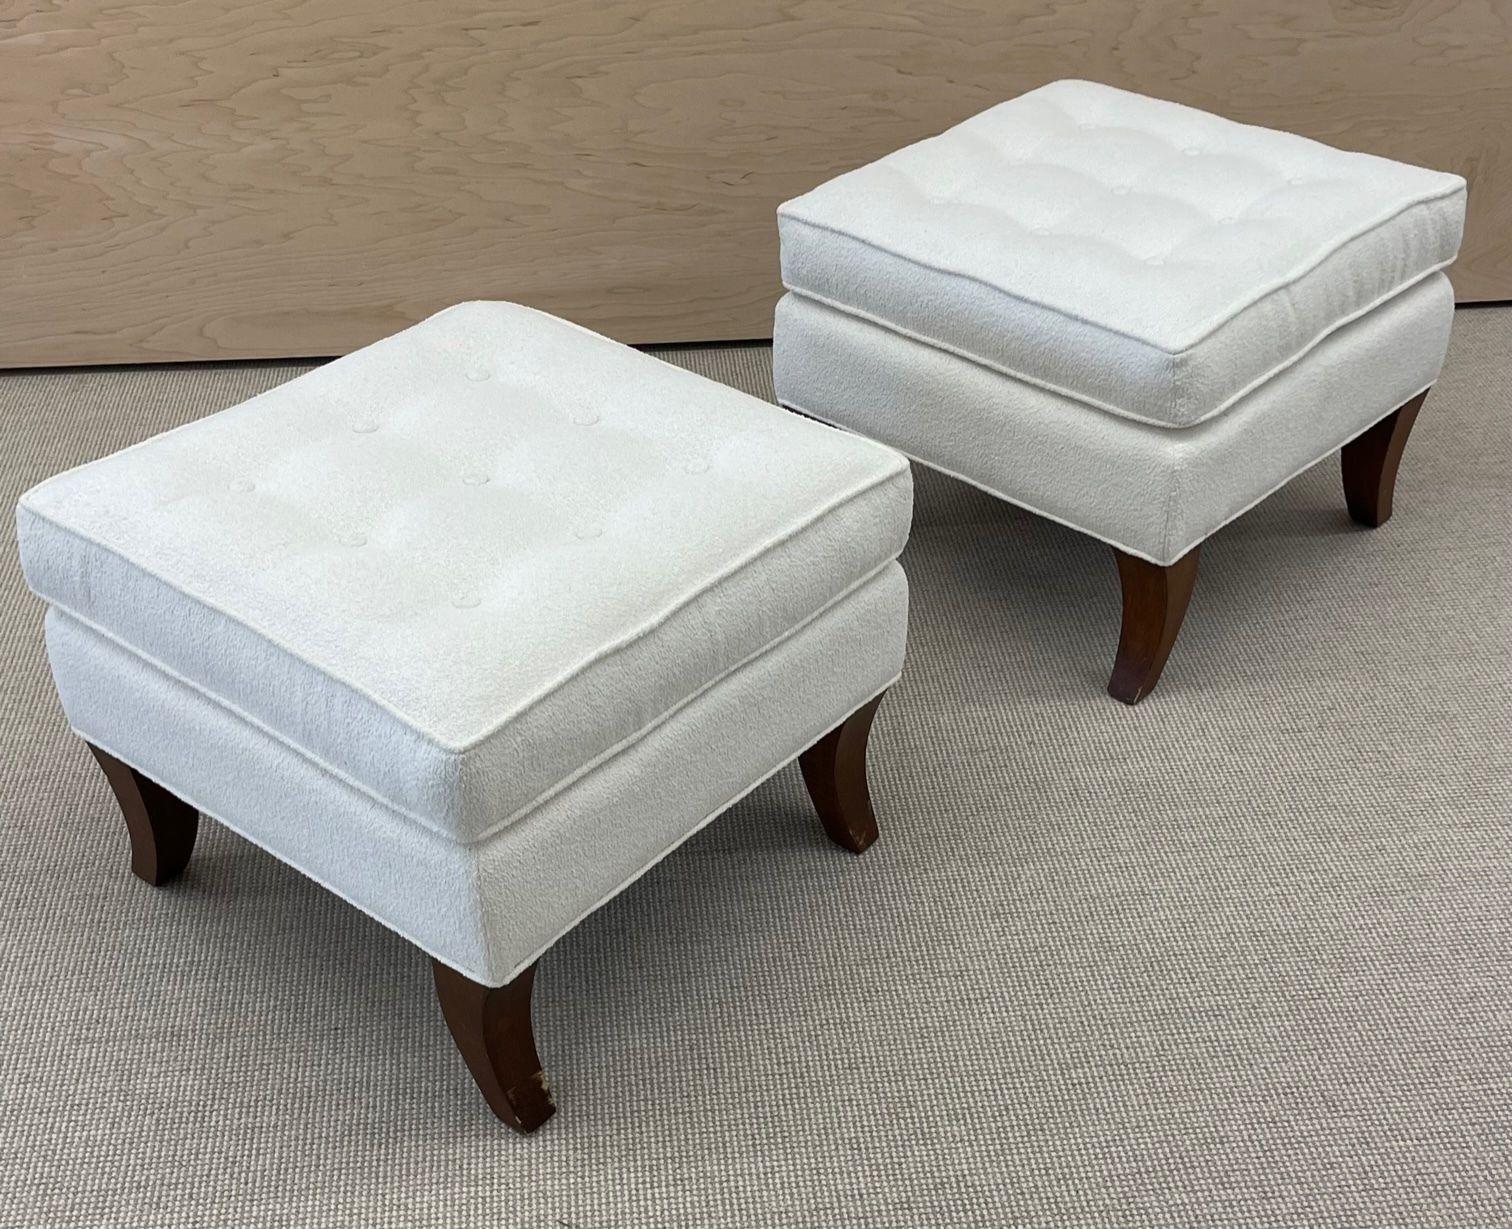 American Designer, Mid-Century Modern Tufted Ottomans, Stools, Walnut, Bouclé In Good Condition For Sale In Stamford, CT